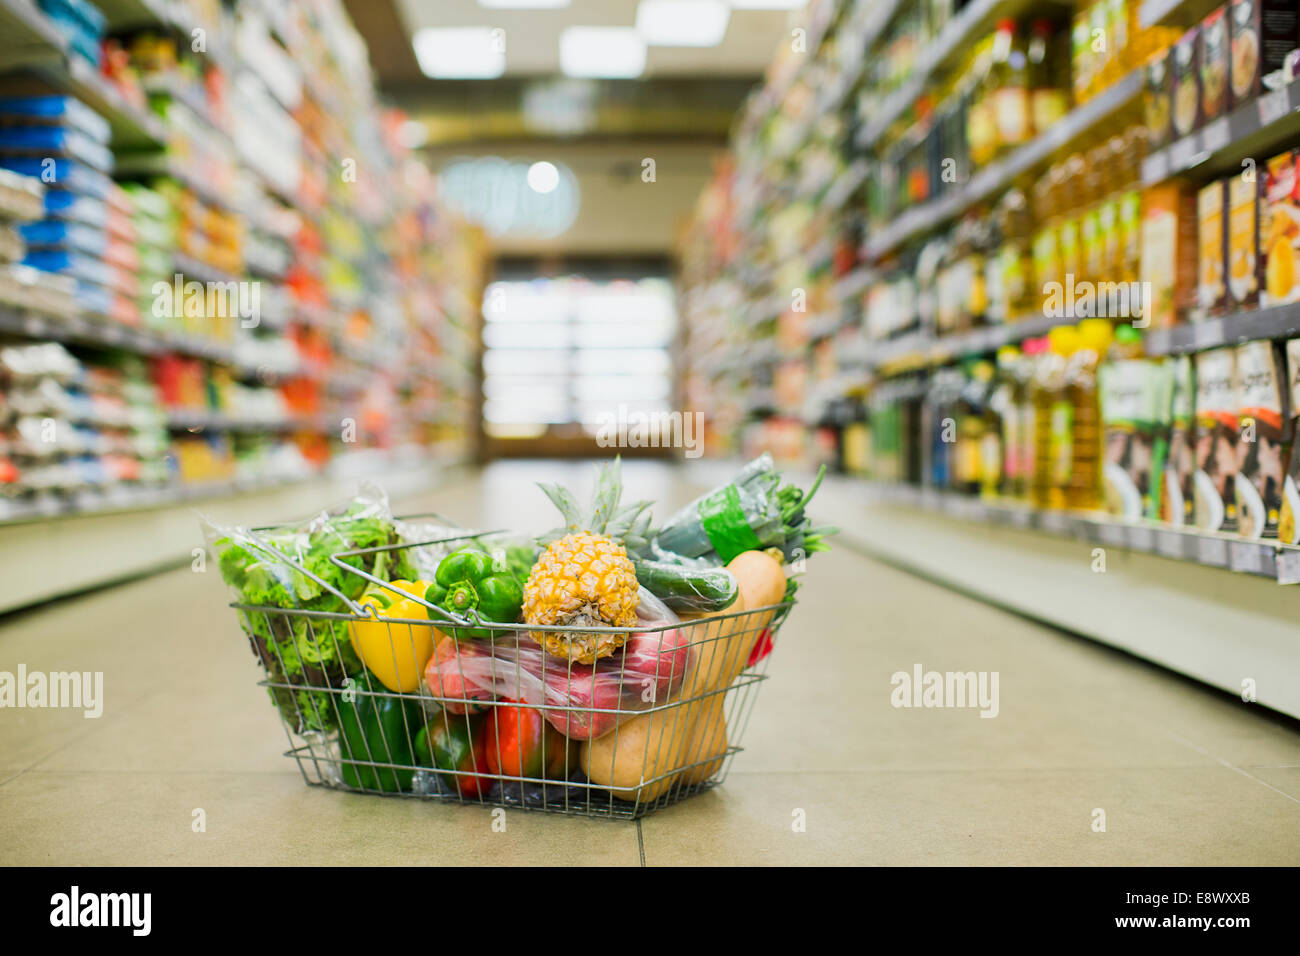 Close up of full shopping basket on floor of grocery store Stock Photo